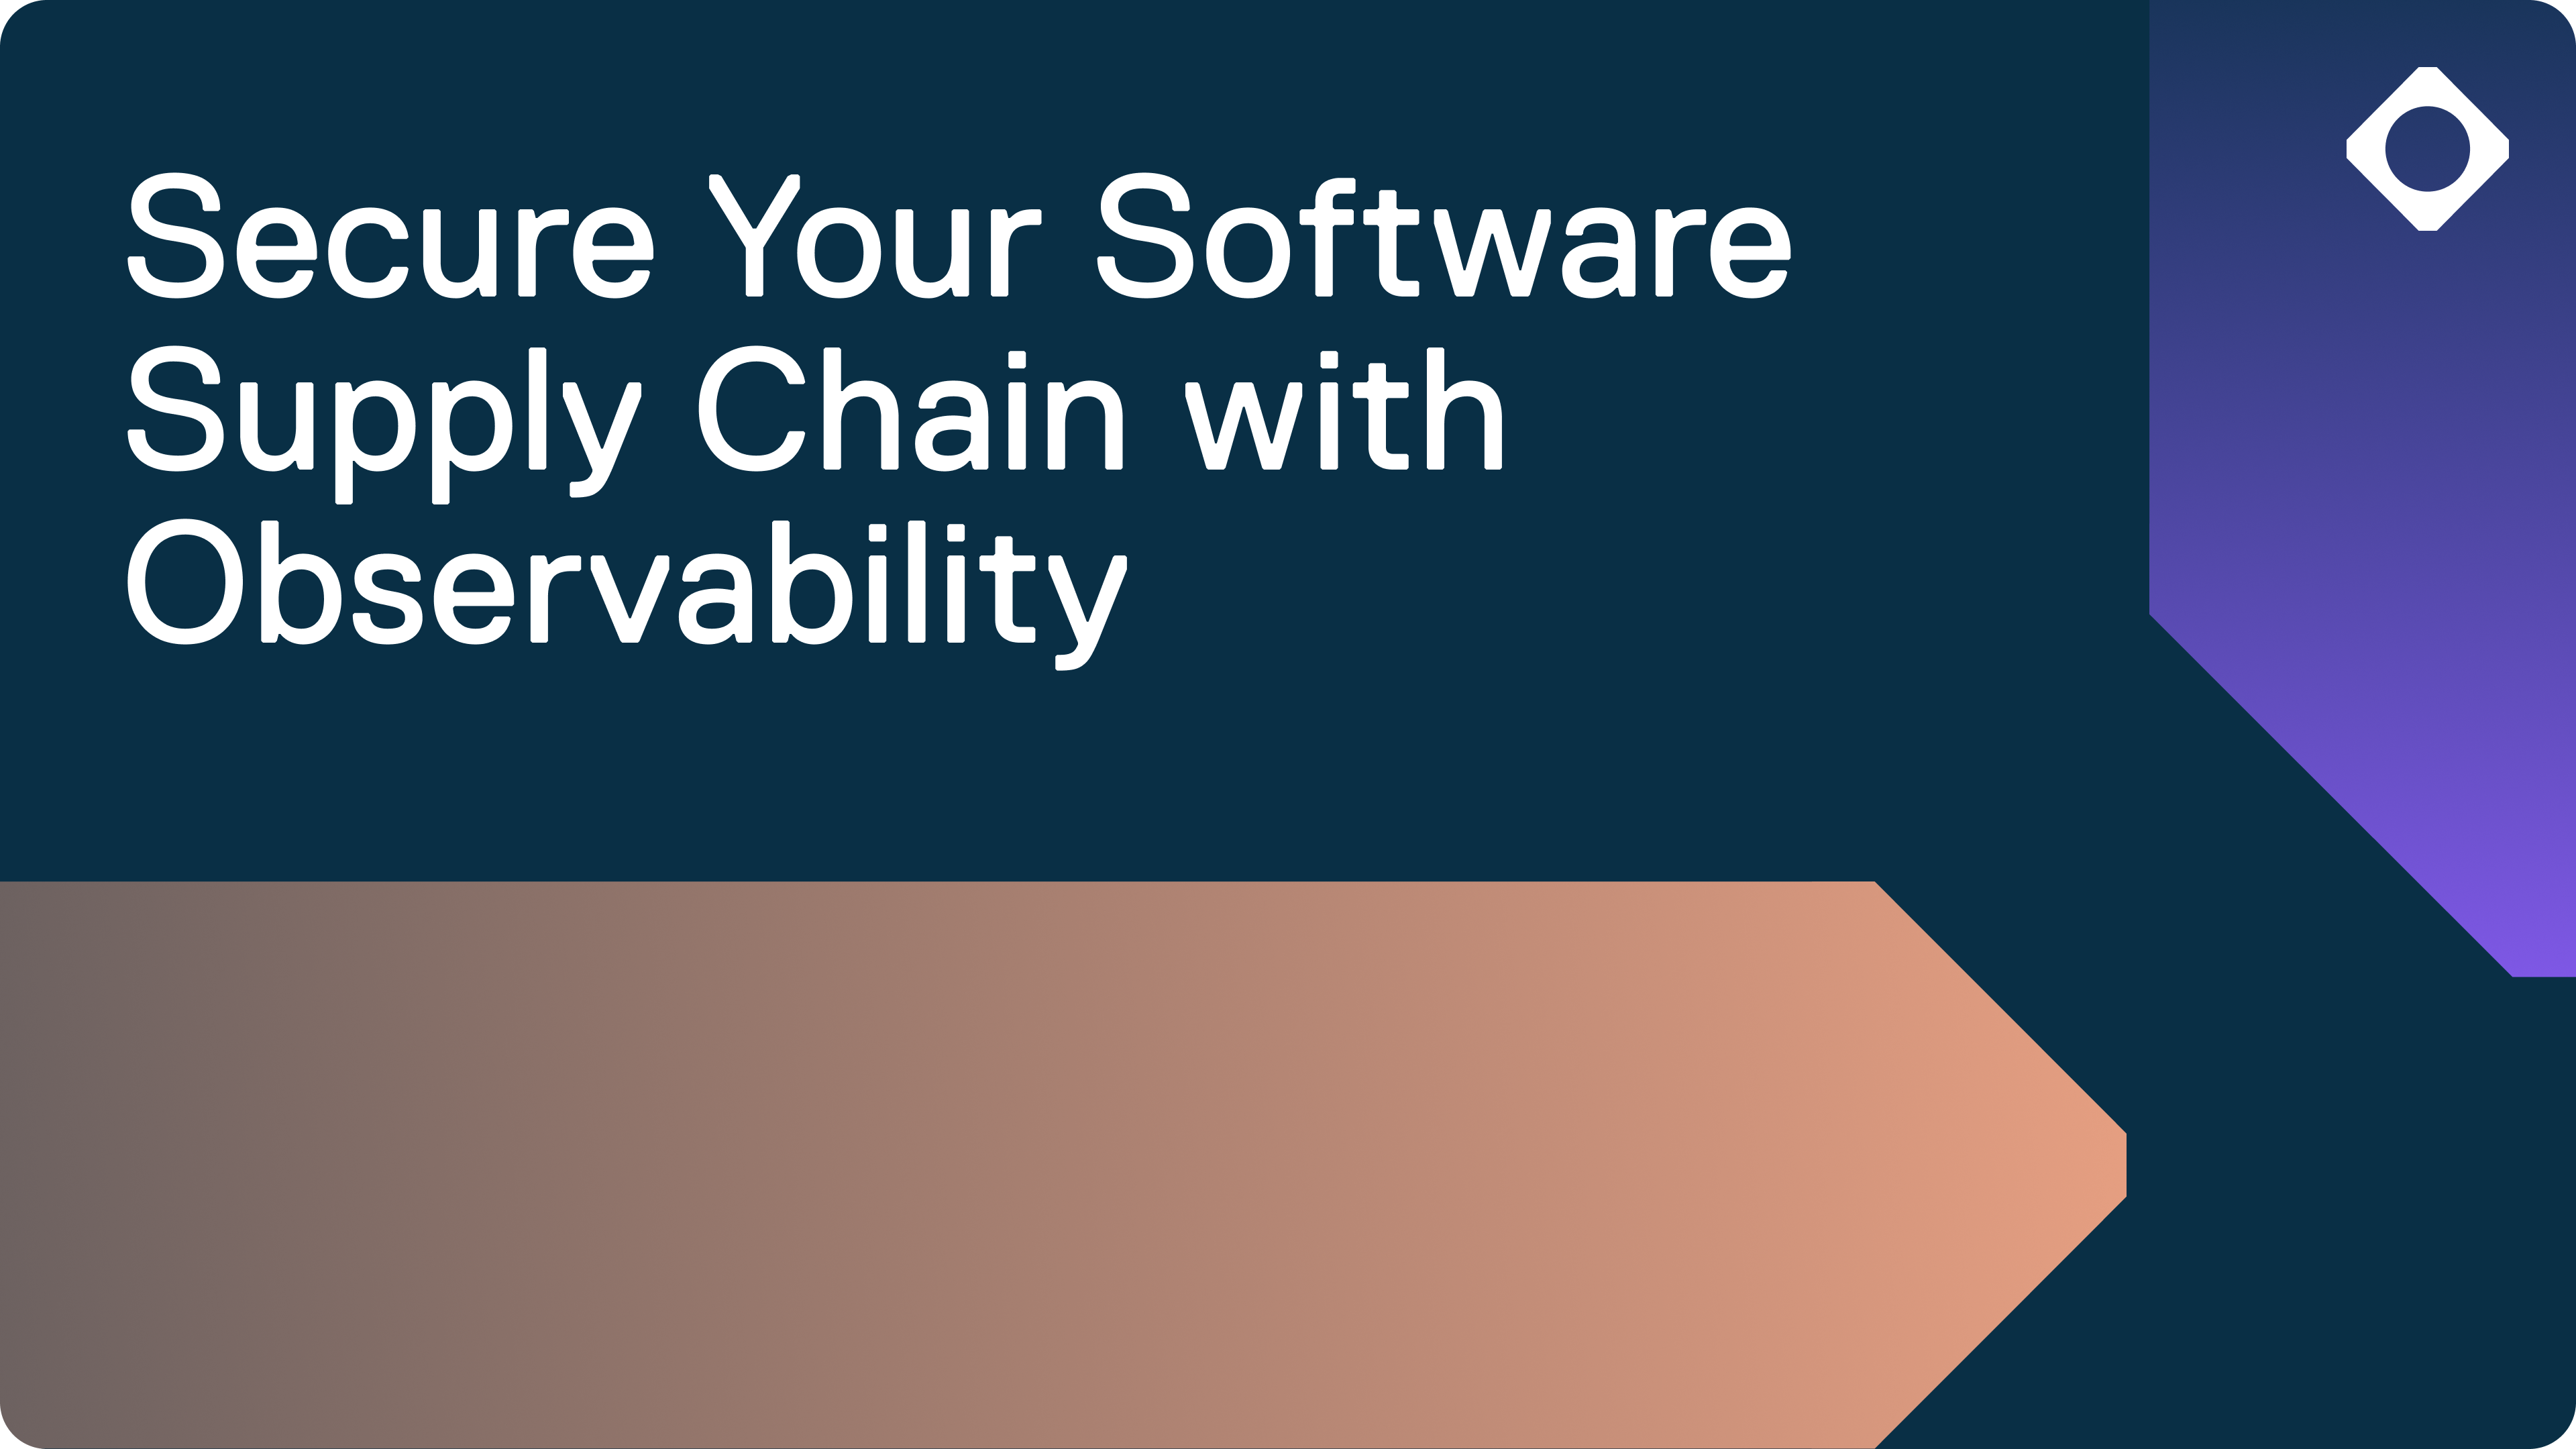 Secure Your Software Supply Chain Using Observability